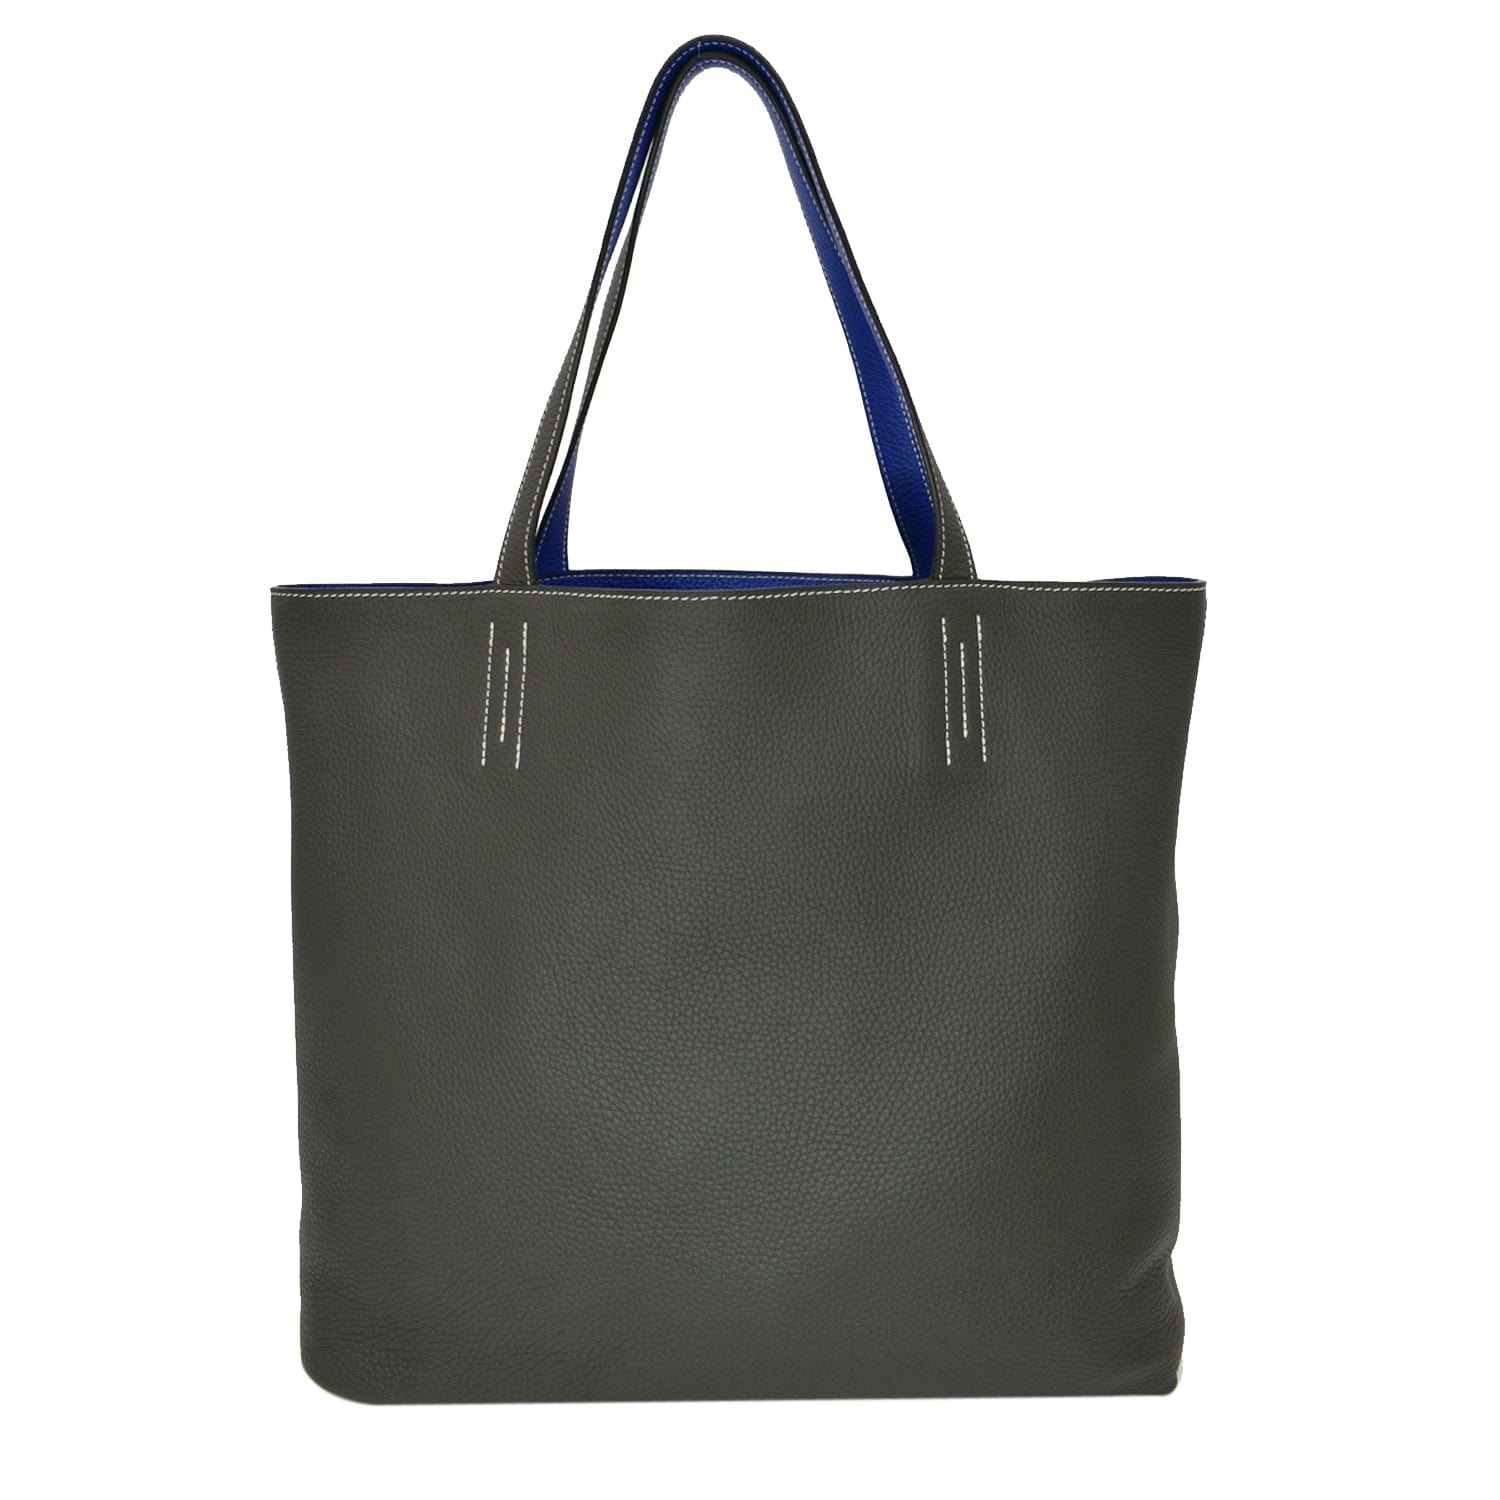 Only 1199.60 usd for Hermès Bag, Taurillon Clemence Double Sens 36  Reversible Tote Online at the Shop